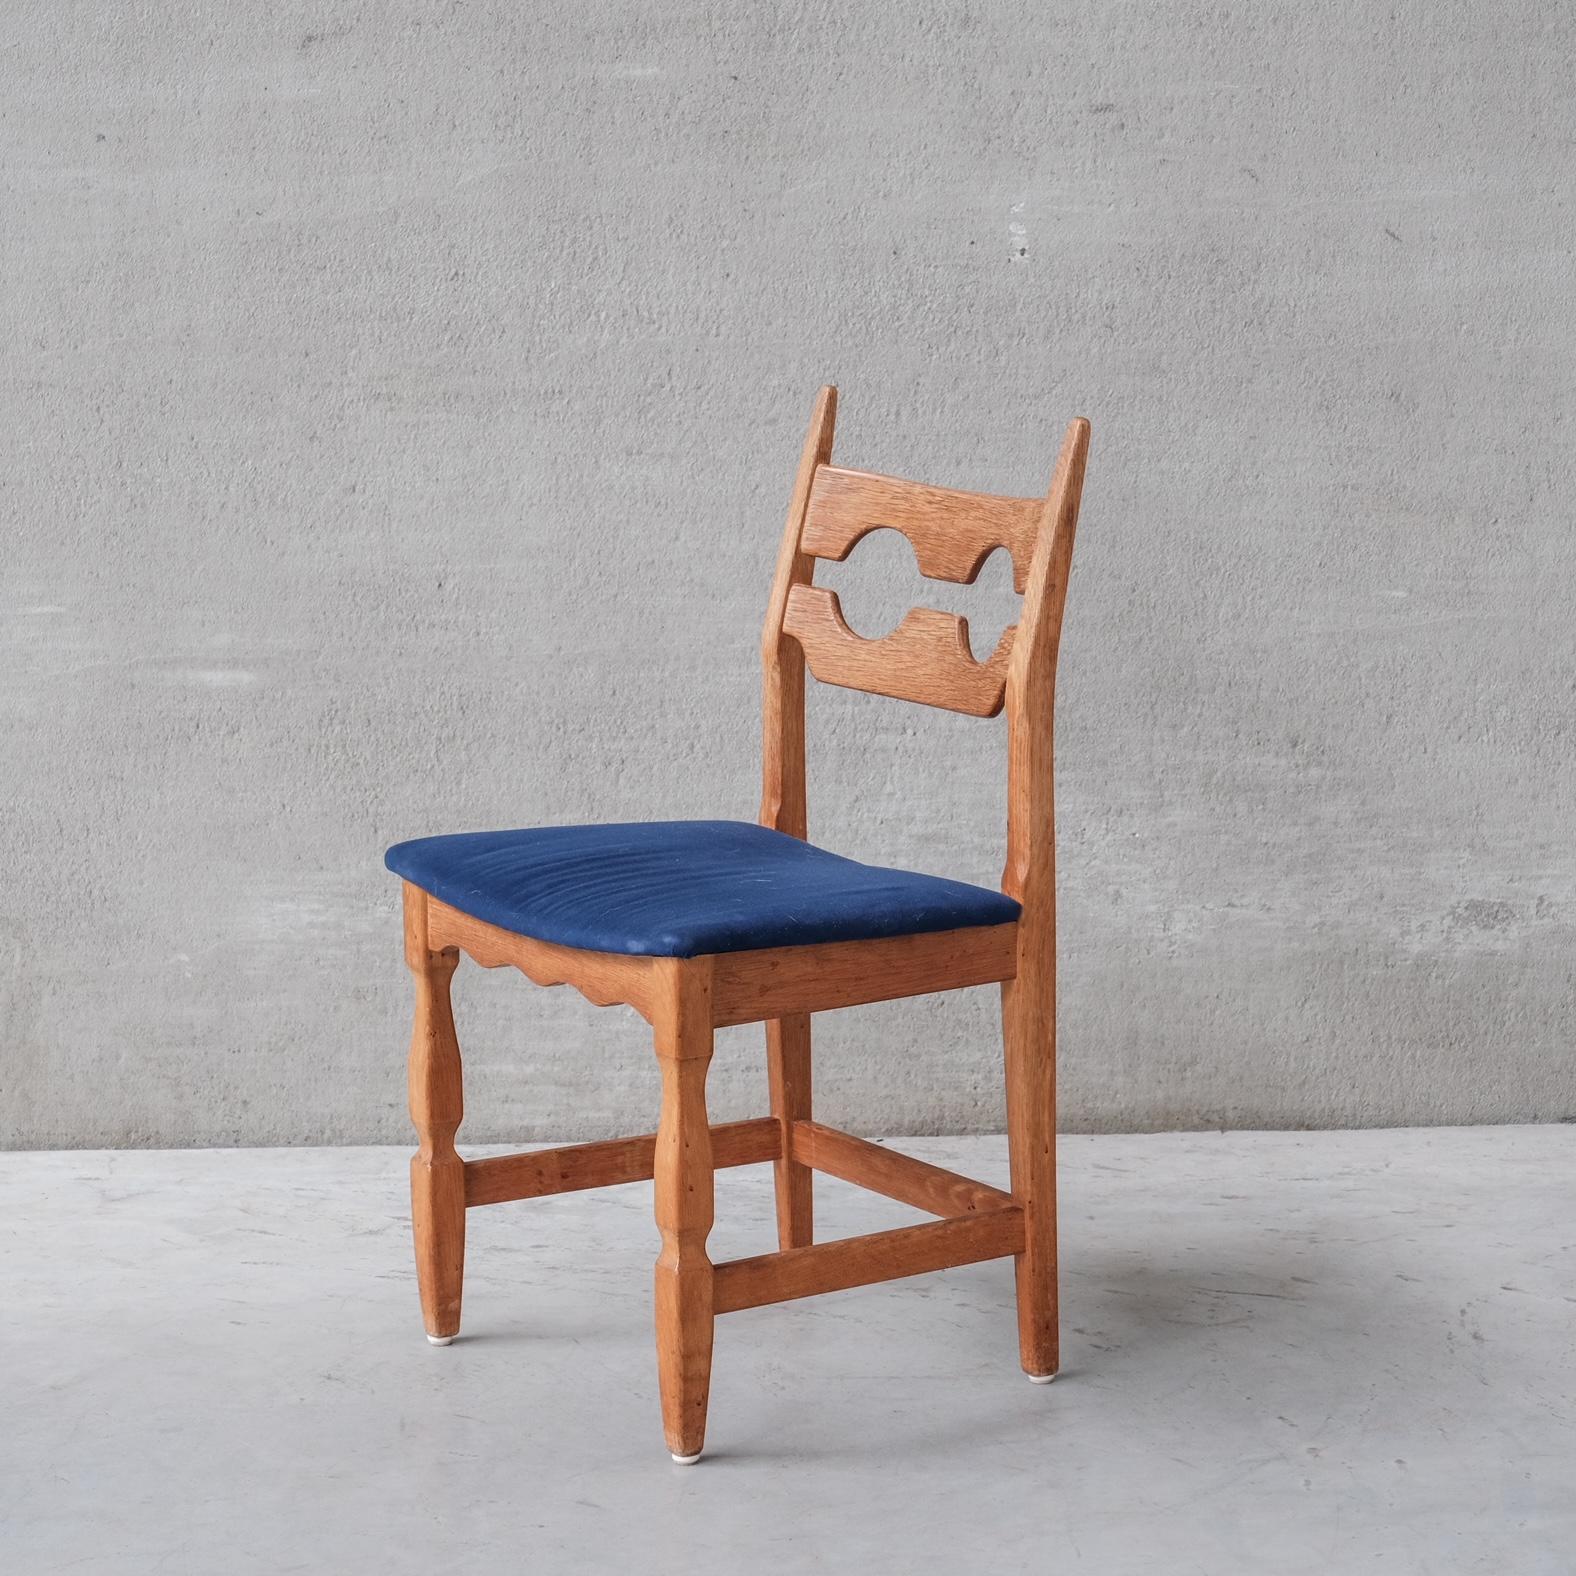 Oak dining chairs by Henning/Henry Kjaernulf. 

Denmark, circa 1960s. 

'Razor back' or 'Razor blade' model. 

A more rare model with straight central backs. 

Good condition for the wood, some wear and scuffs commensurate with age. 

The